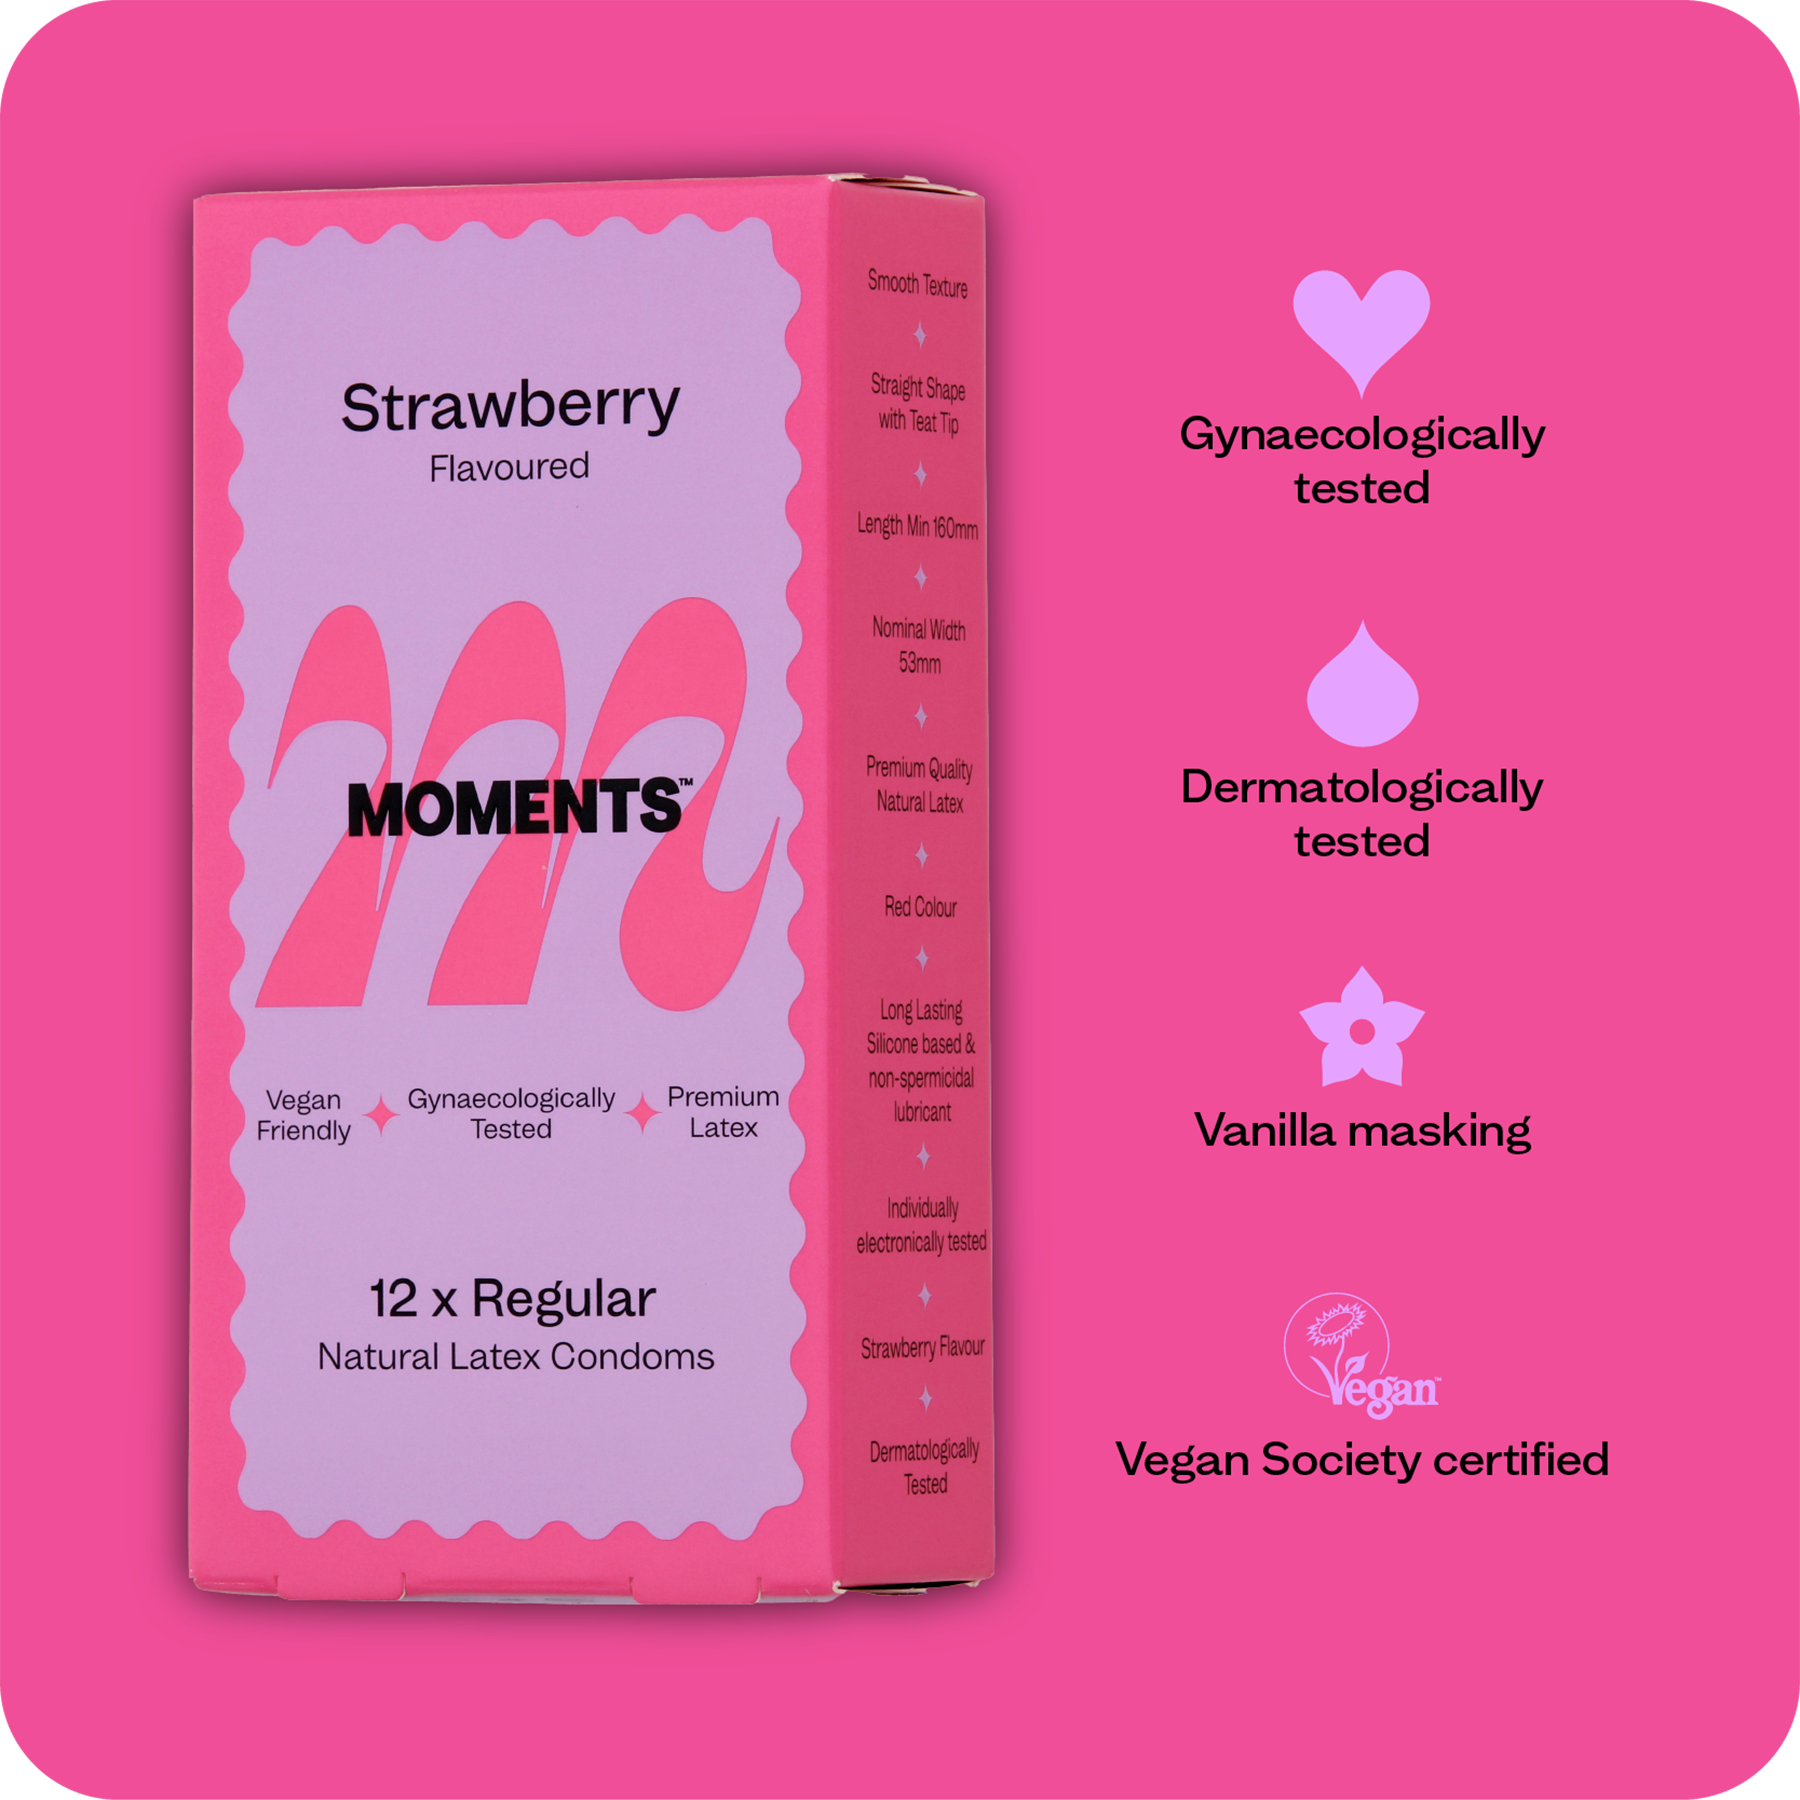 Moments Strawberry (3 Packs)